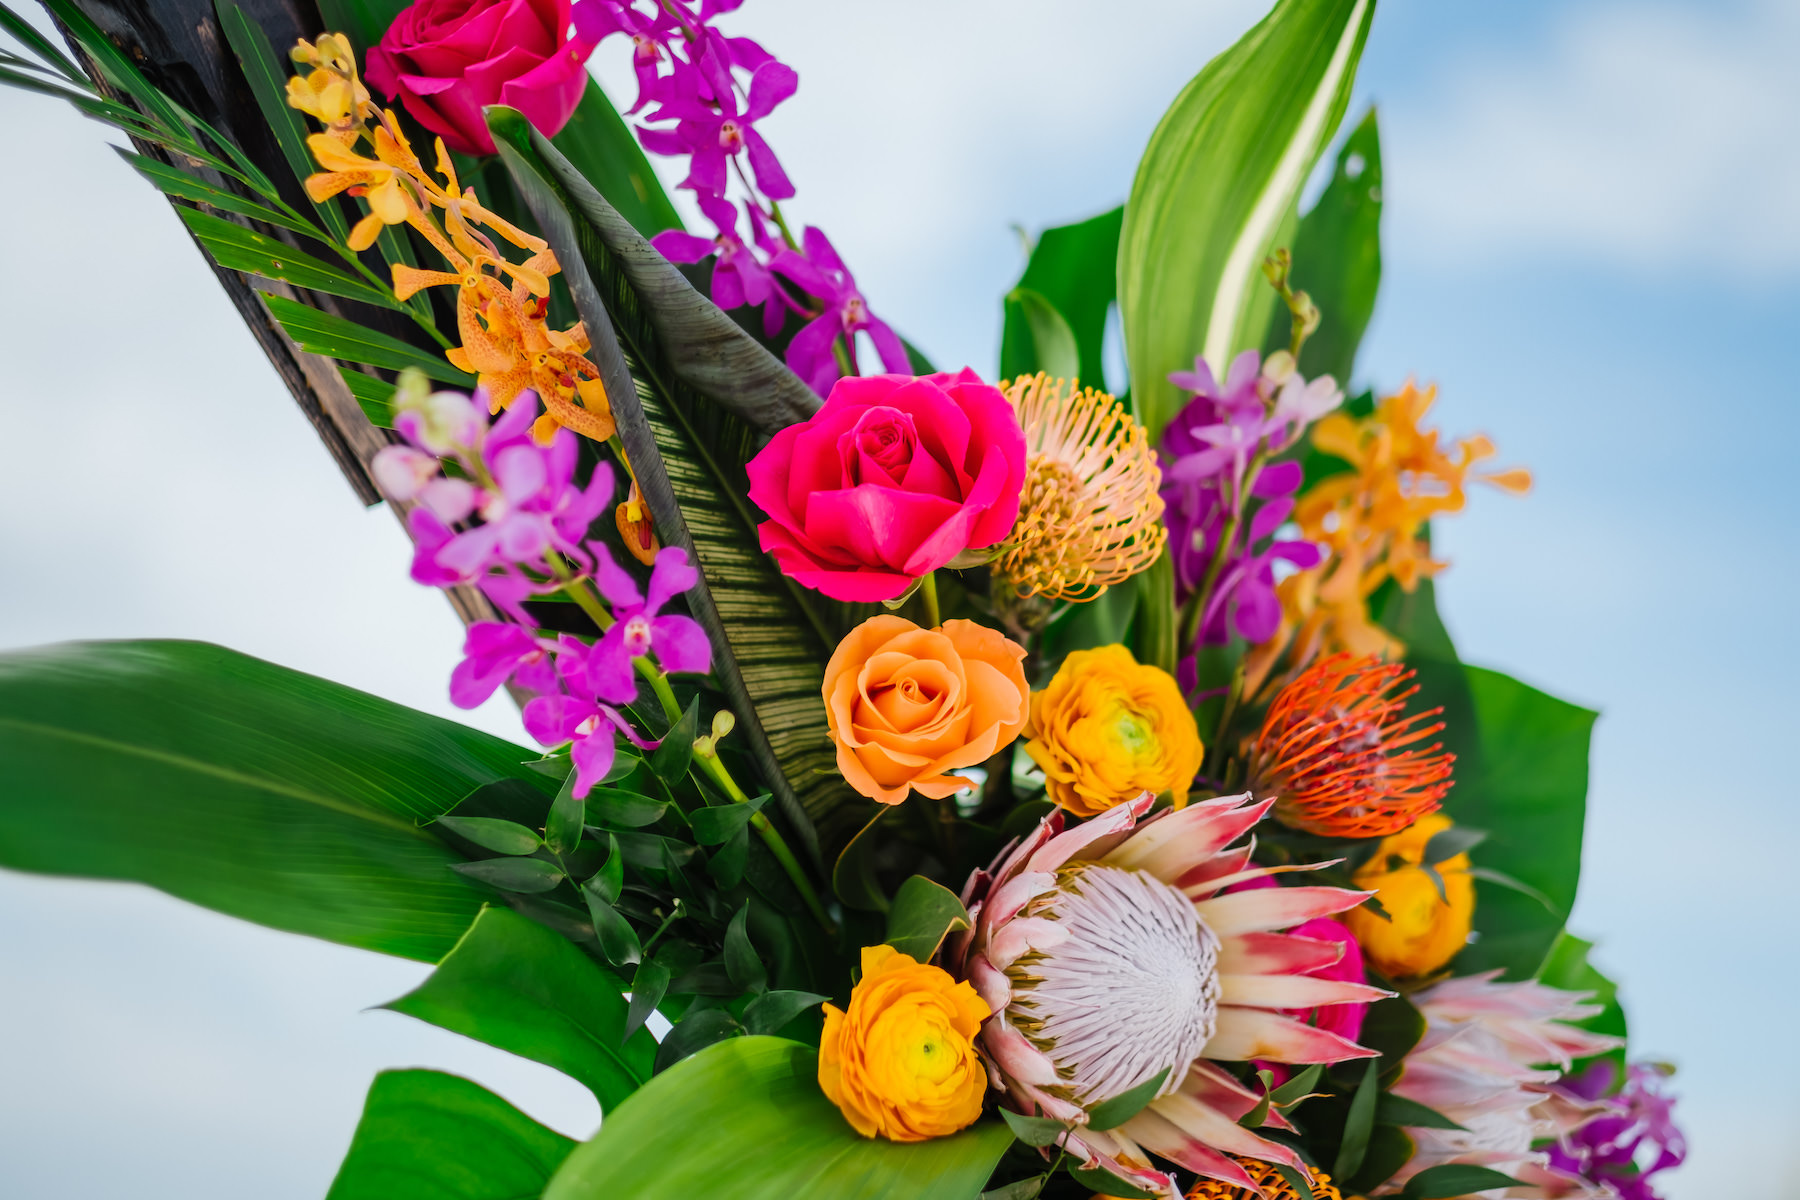 Tropical Wedding Ceremony Decor, Pink and Orange Roses, King Proteas, Purple Orchids, Yellow Peony, Monstera Palm Leaves Floral Arrangements